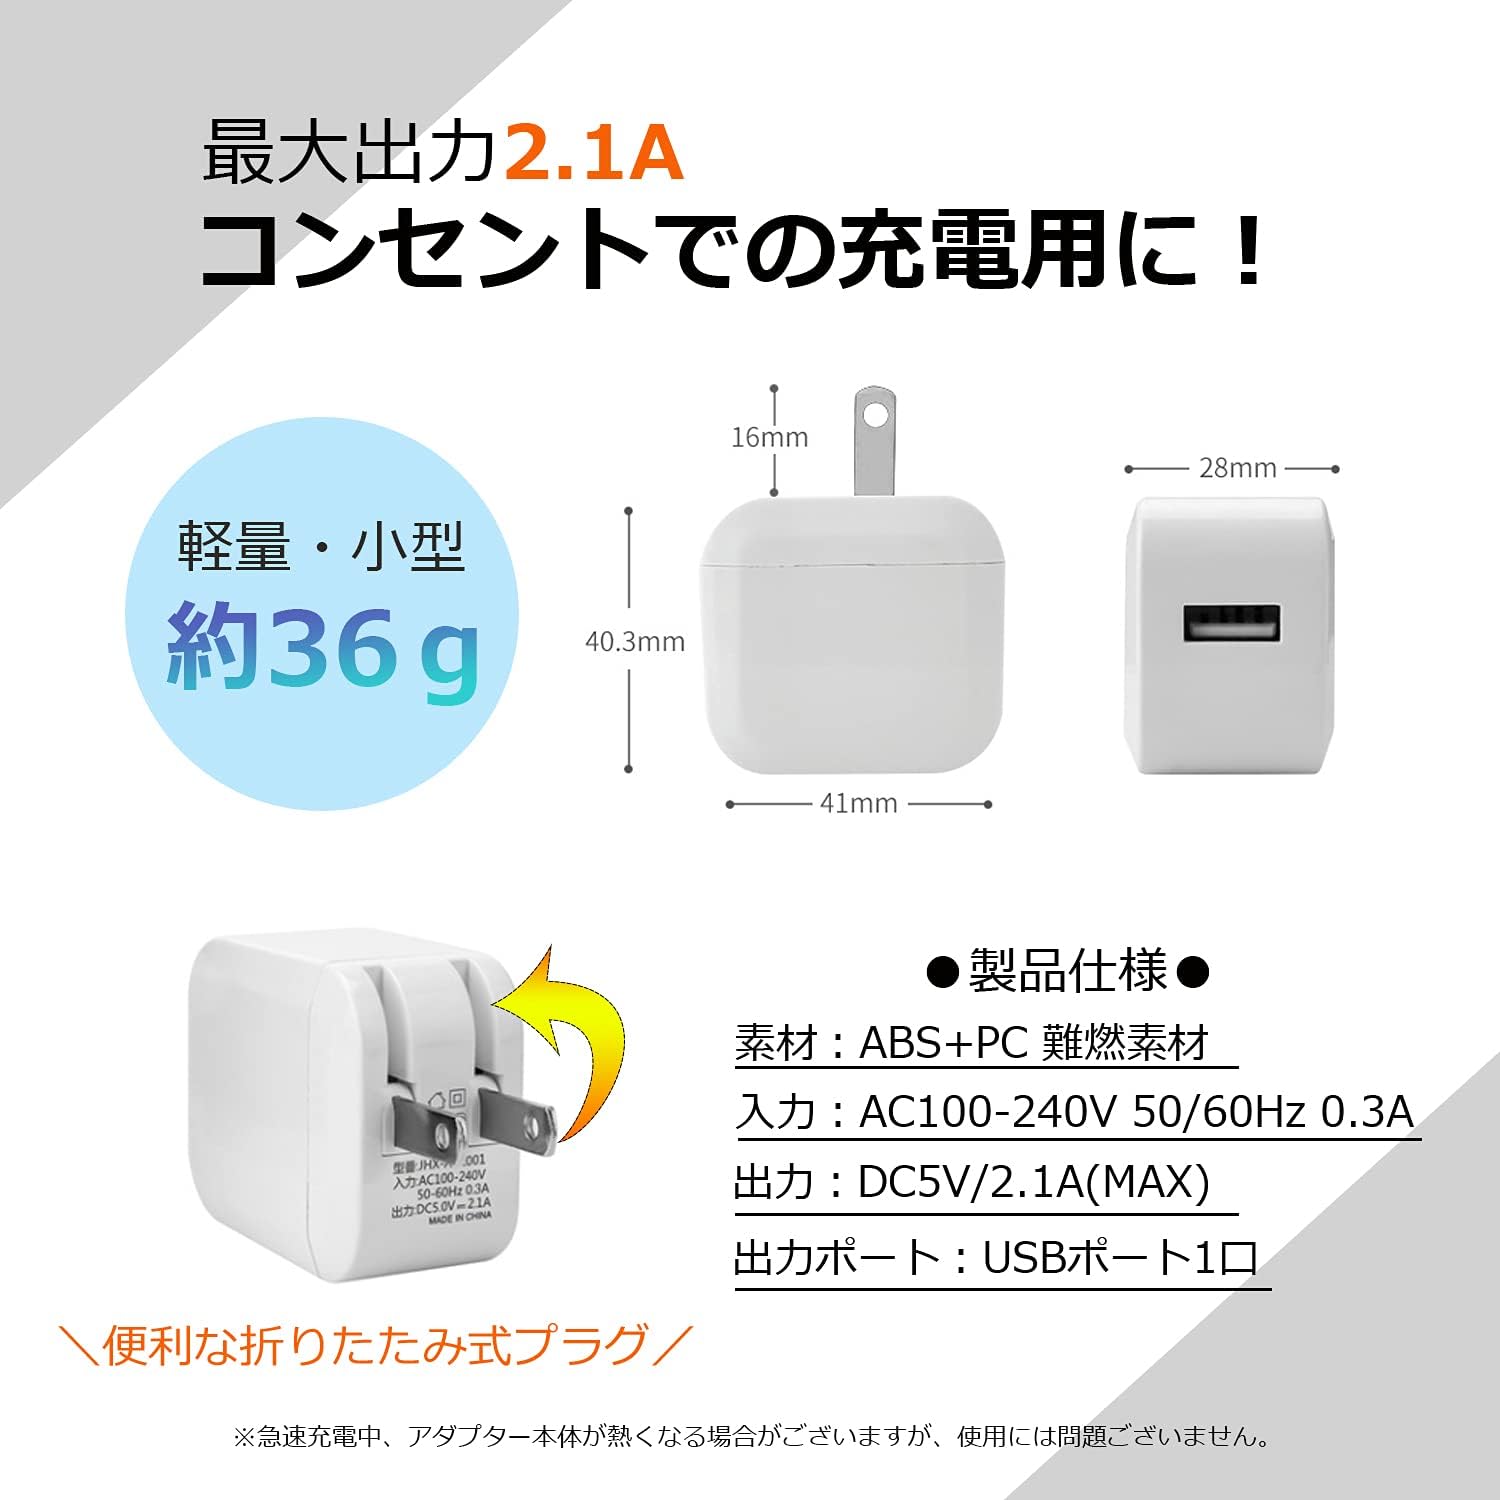 LC-E17 LP-E17 Canon キャノン 互換USB充電器 ★コンセント充電用ACアダプター付き★ 2点セット　イオス キス 純正バッテリー充電可能 (a2.1)｜rkshop-y｜06